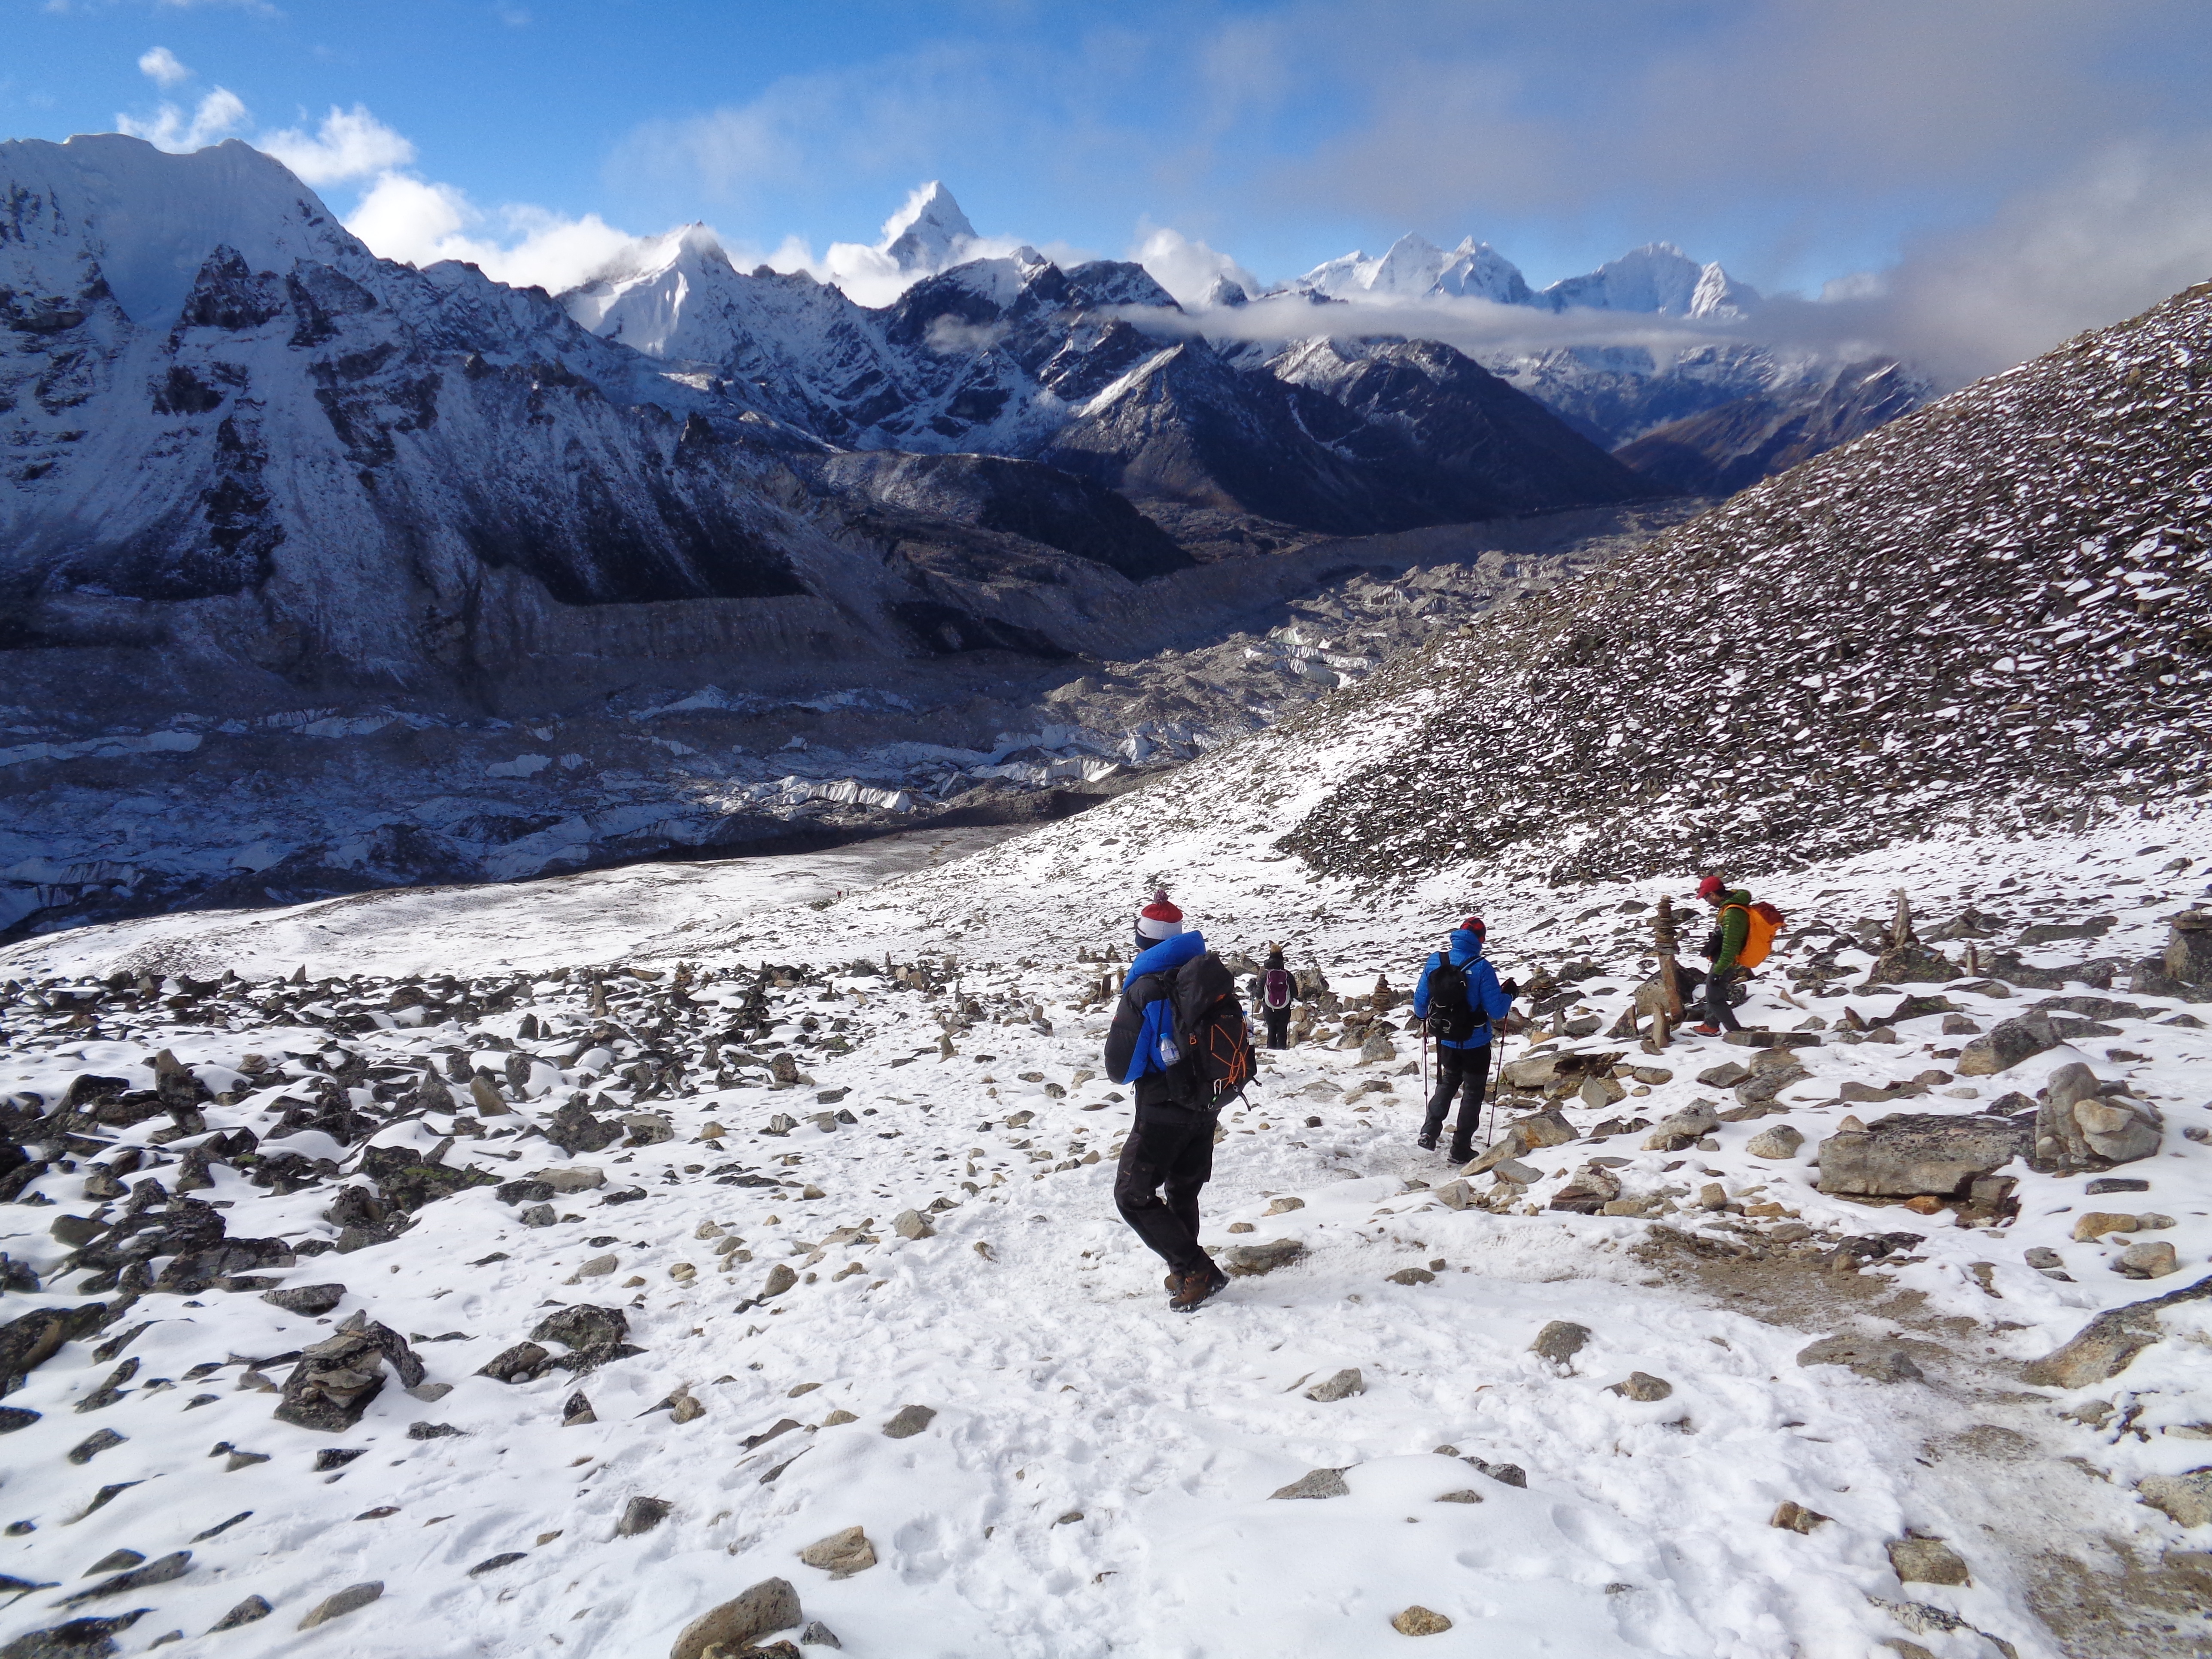 Snow on the Trail from Kala Patthar